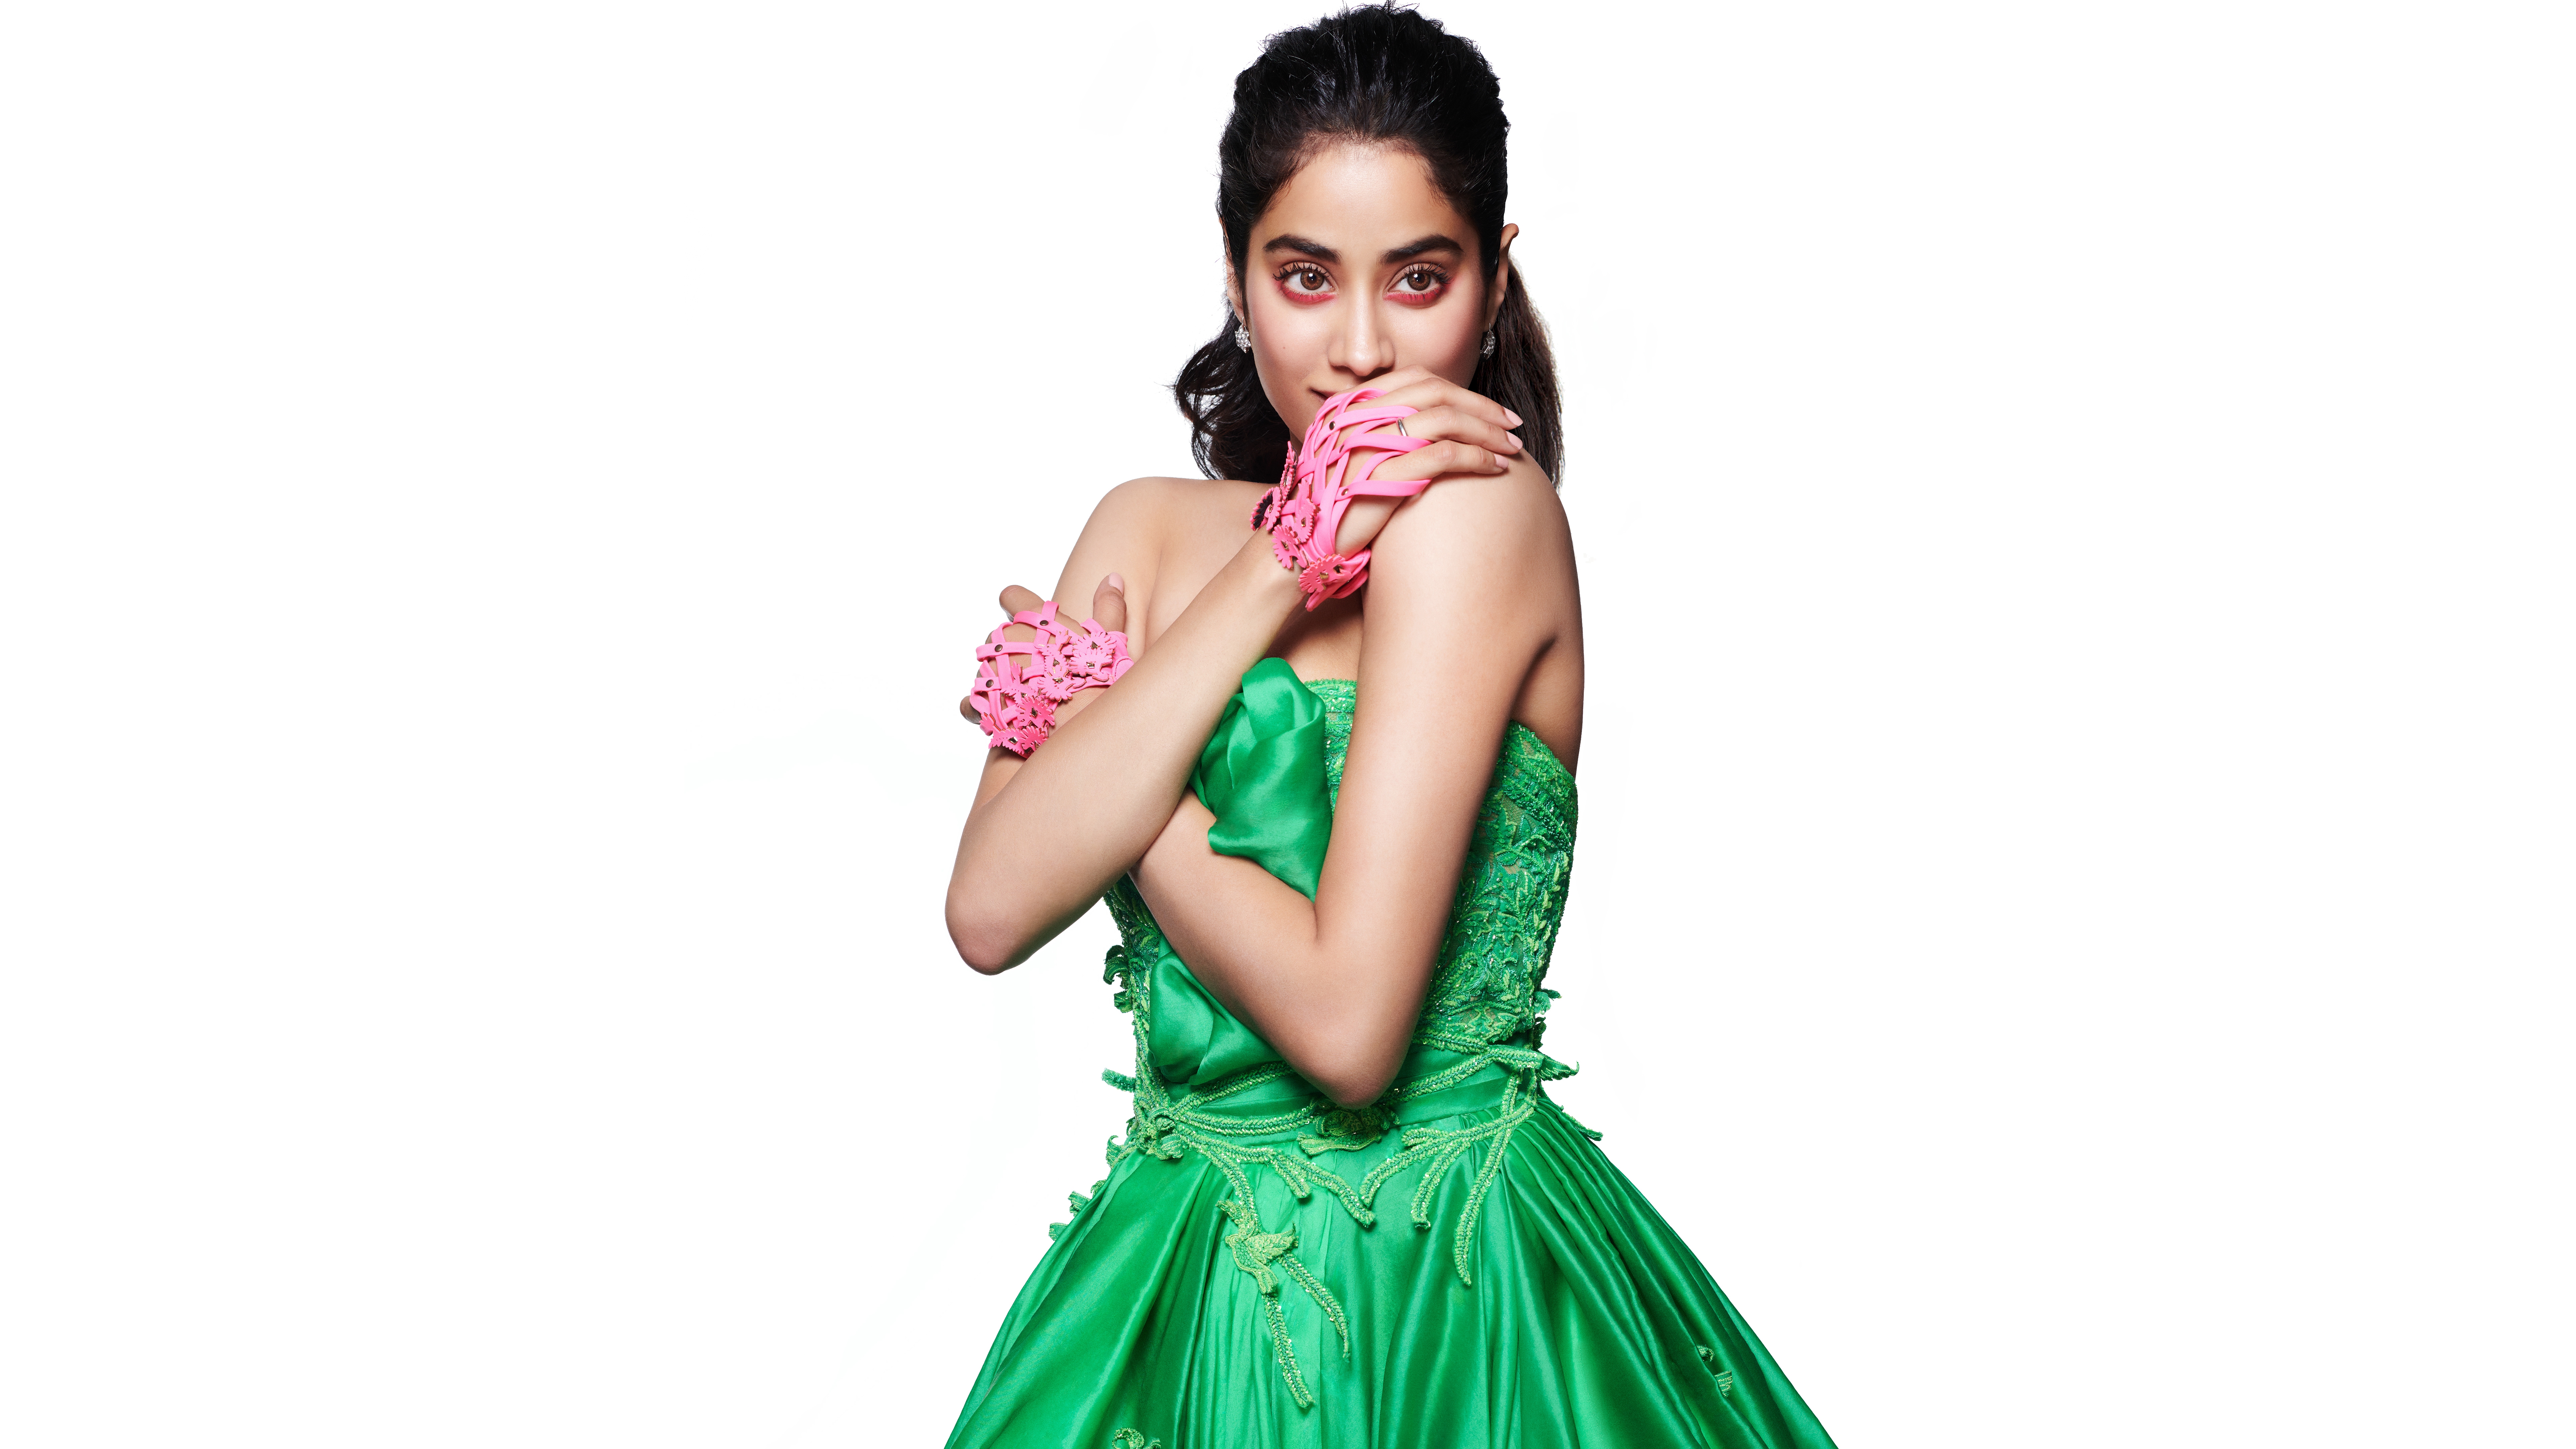 Janhvi Kapoor Bollywood Actress 4k 8k Wallpaper 1080p Full Hd Janhvi Kapoor Hd 2896988 Hd Wallpaper Backgrounds Download We present you our collection of desktop wallpaper theme: itl cat